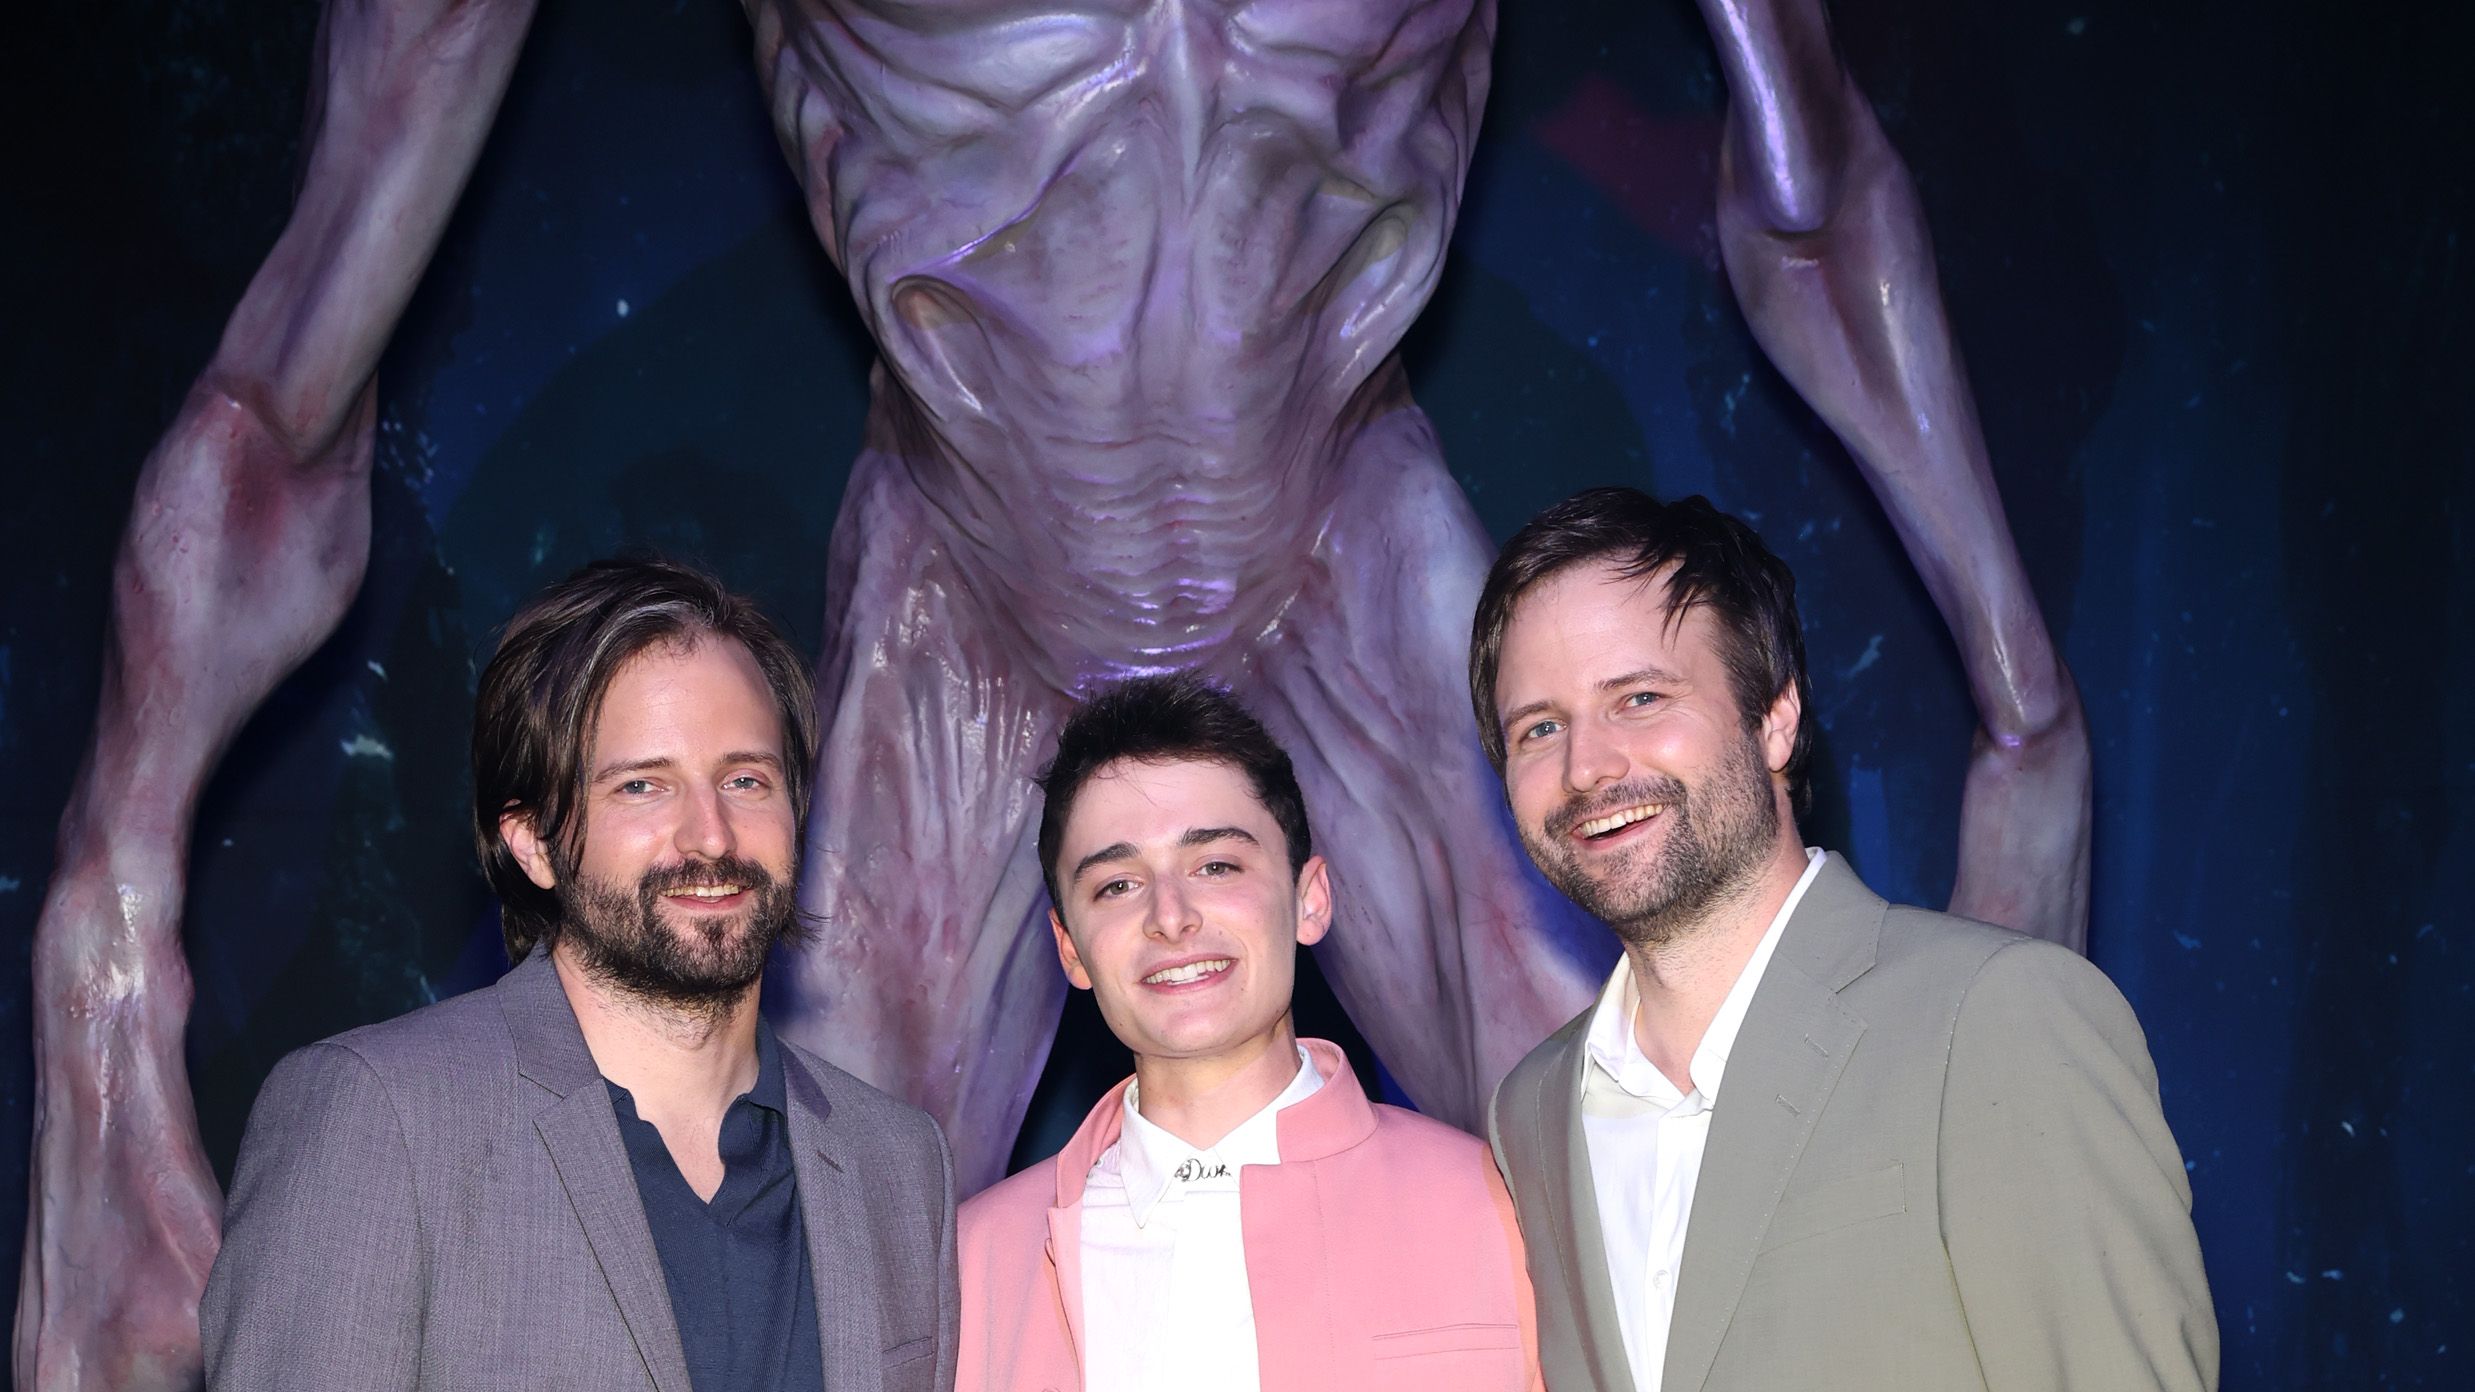 Did 'Stranger Things' Forget Will's Birthday? The Creators Weighed In